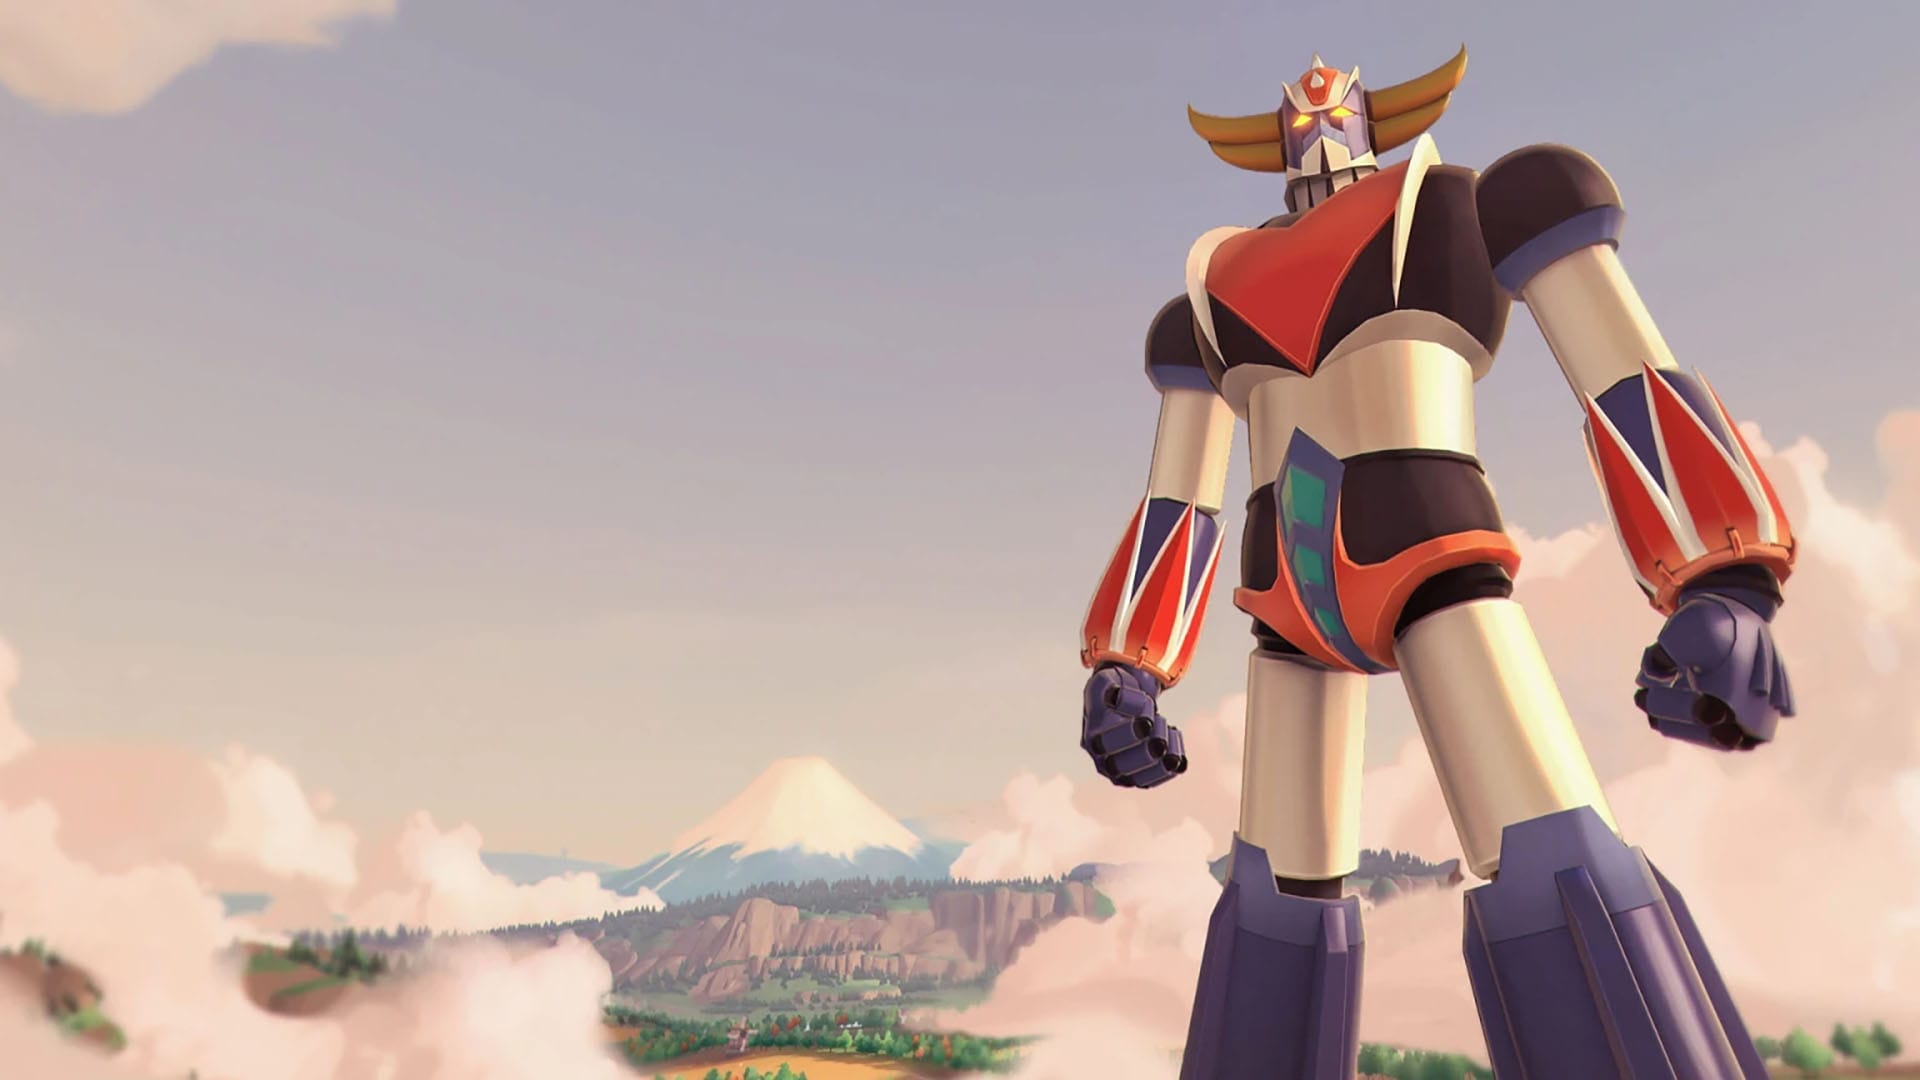 UFO Robot Grendizer: The Feast of the Wolves (PS5)